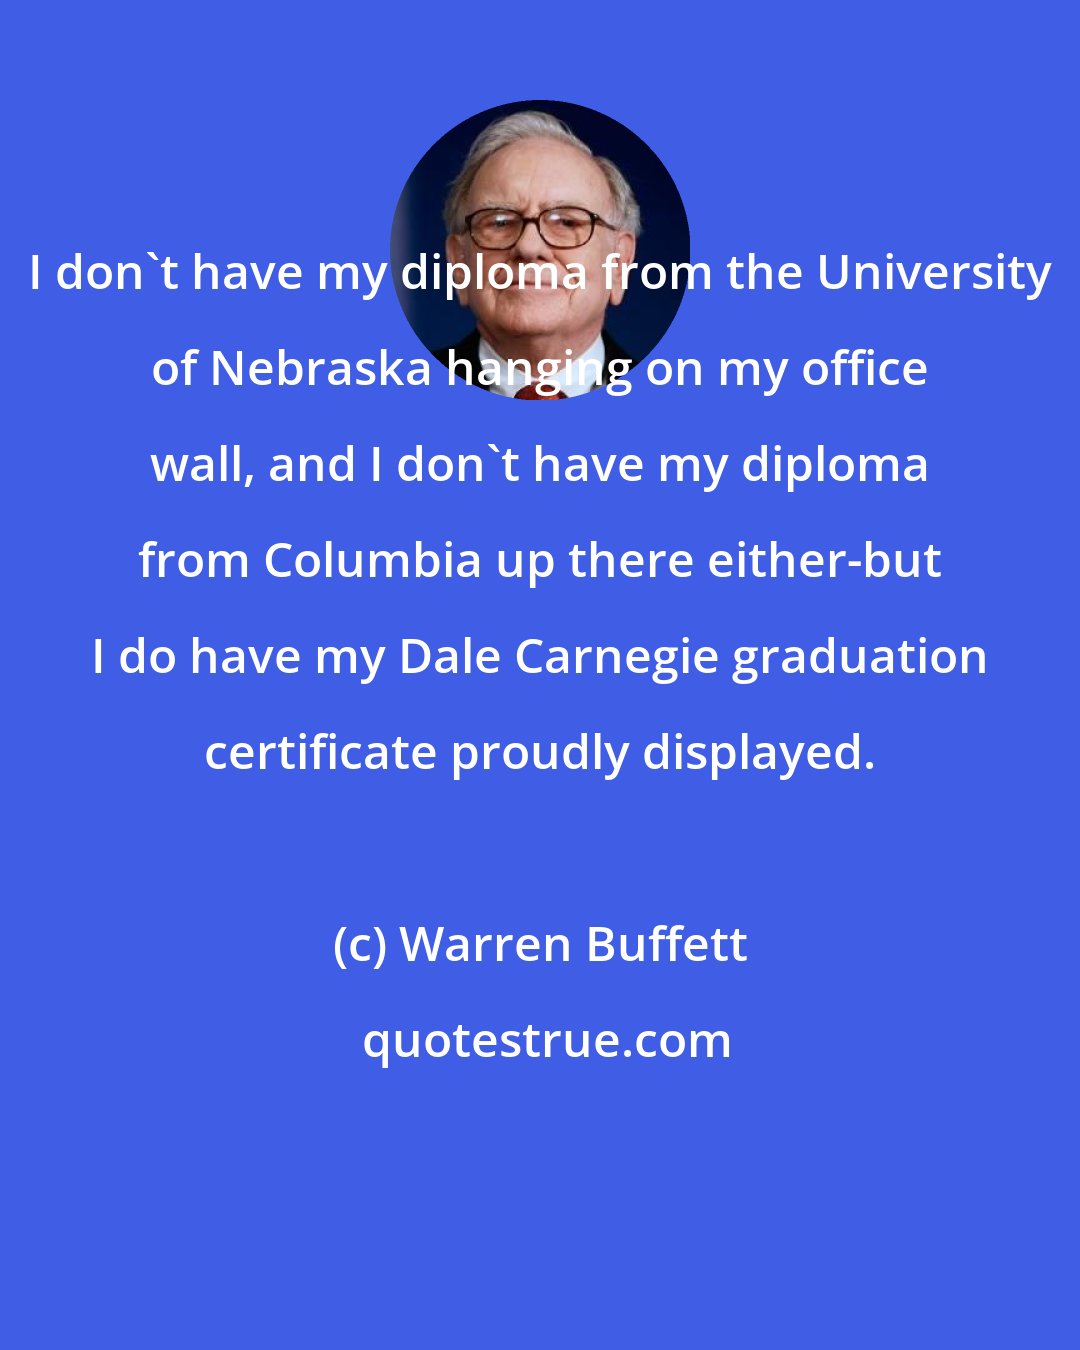 Warren Buffett: I don't have my diploma from the University of Nebraska hanging on my office wall, and I don't have my diploma from Columbia up there either-but I do have my Dale Carnegie graduation certificate proudly displayed.